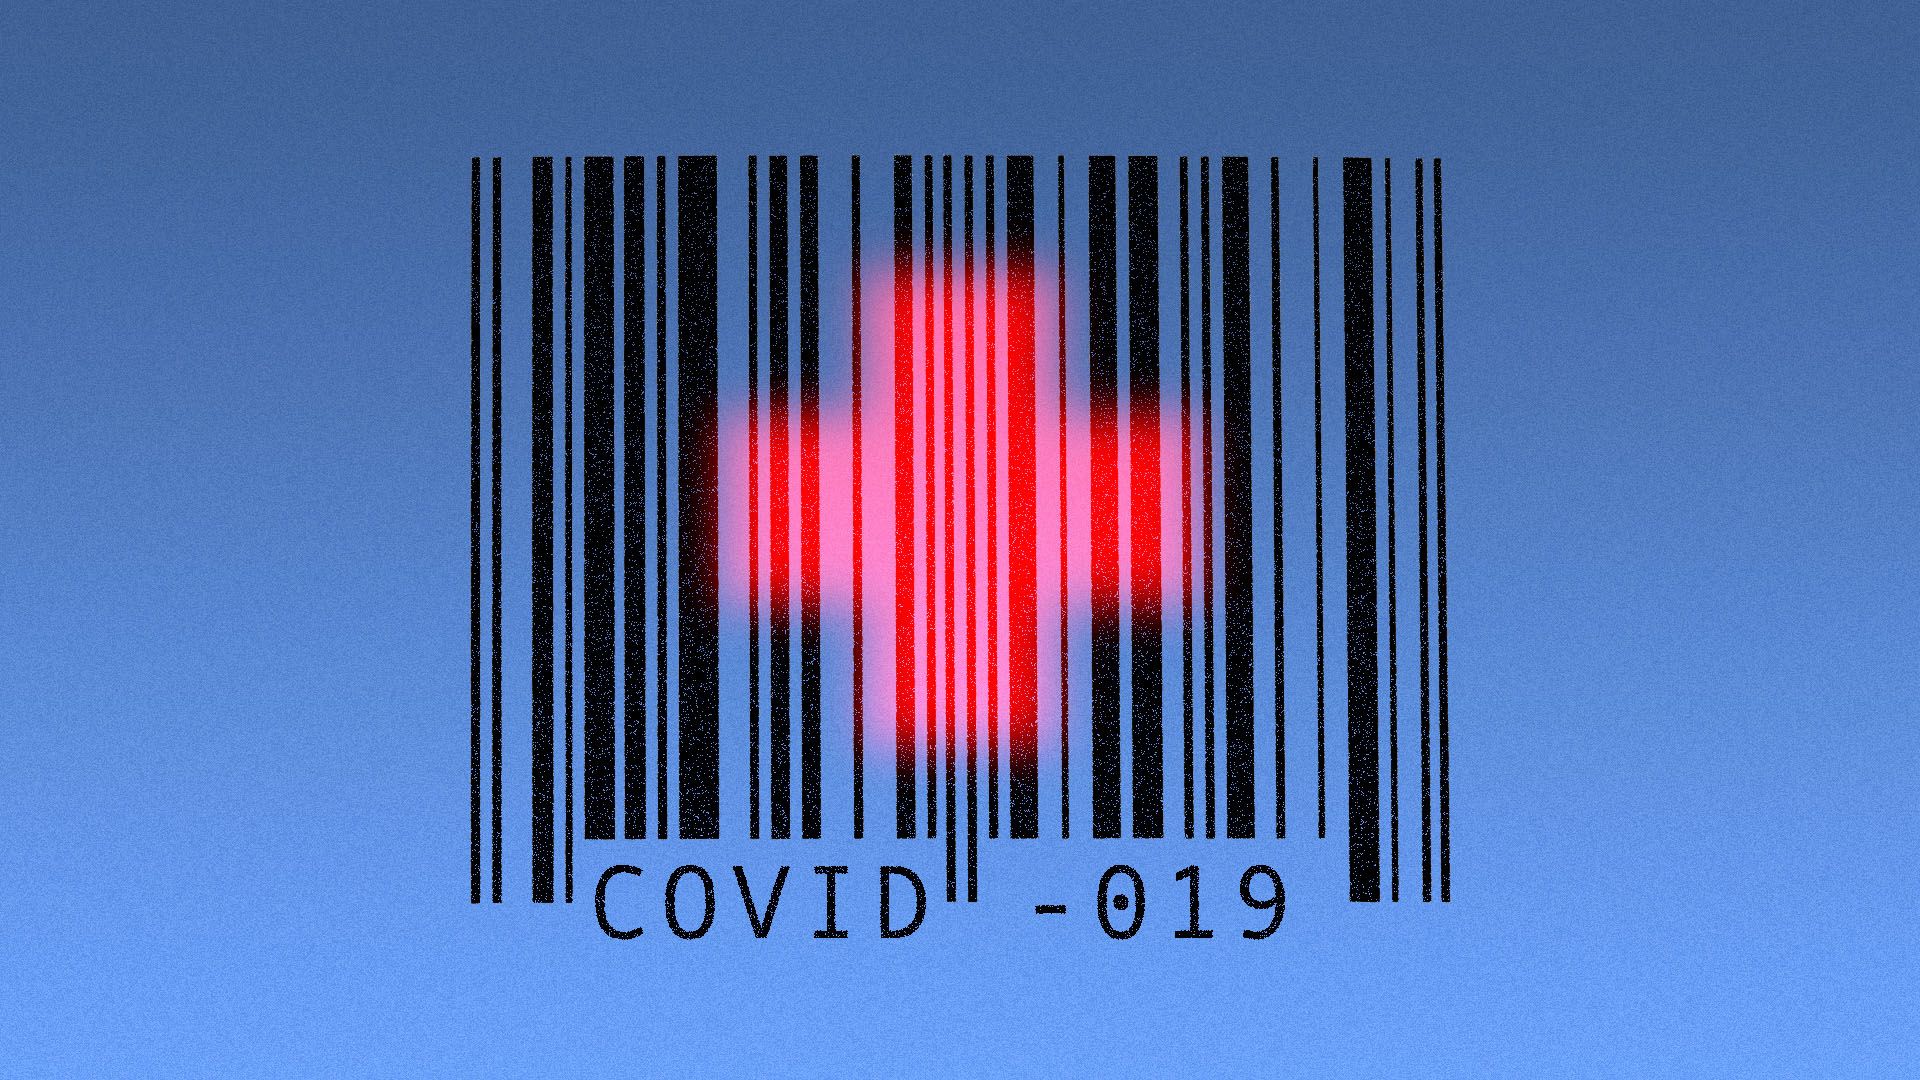 Illustration a barcode that reads Covid-19 being scanned by aaa laser in the shape of red cross